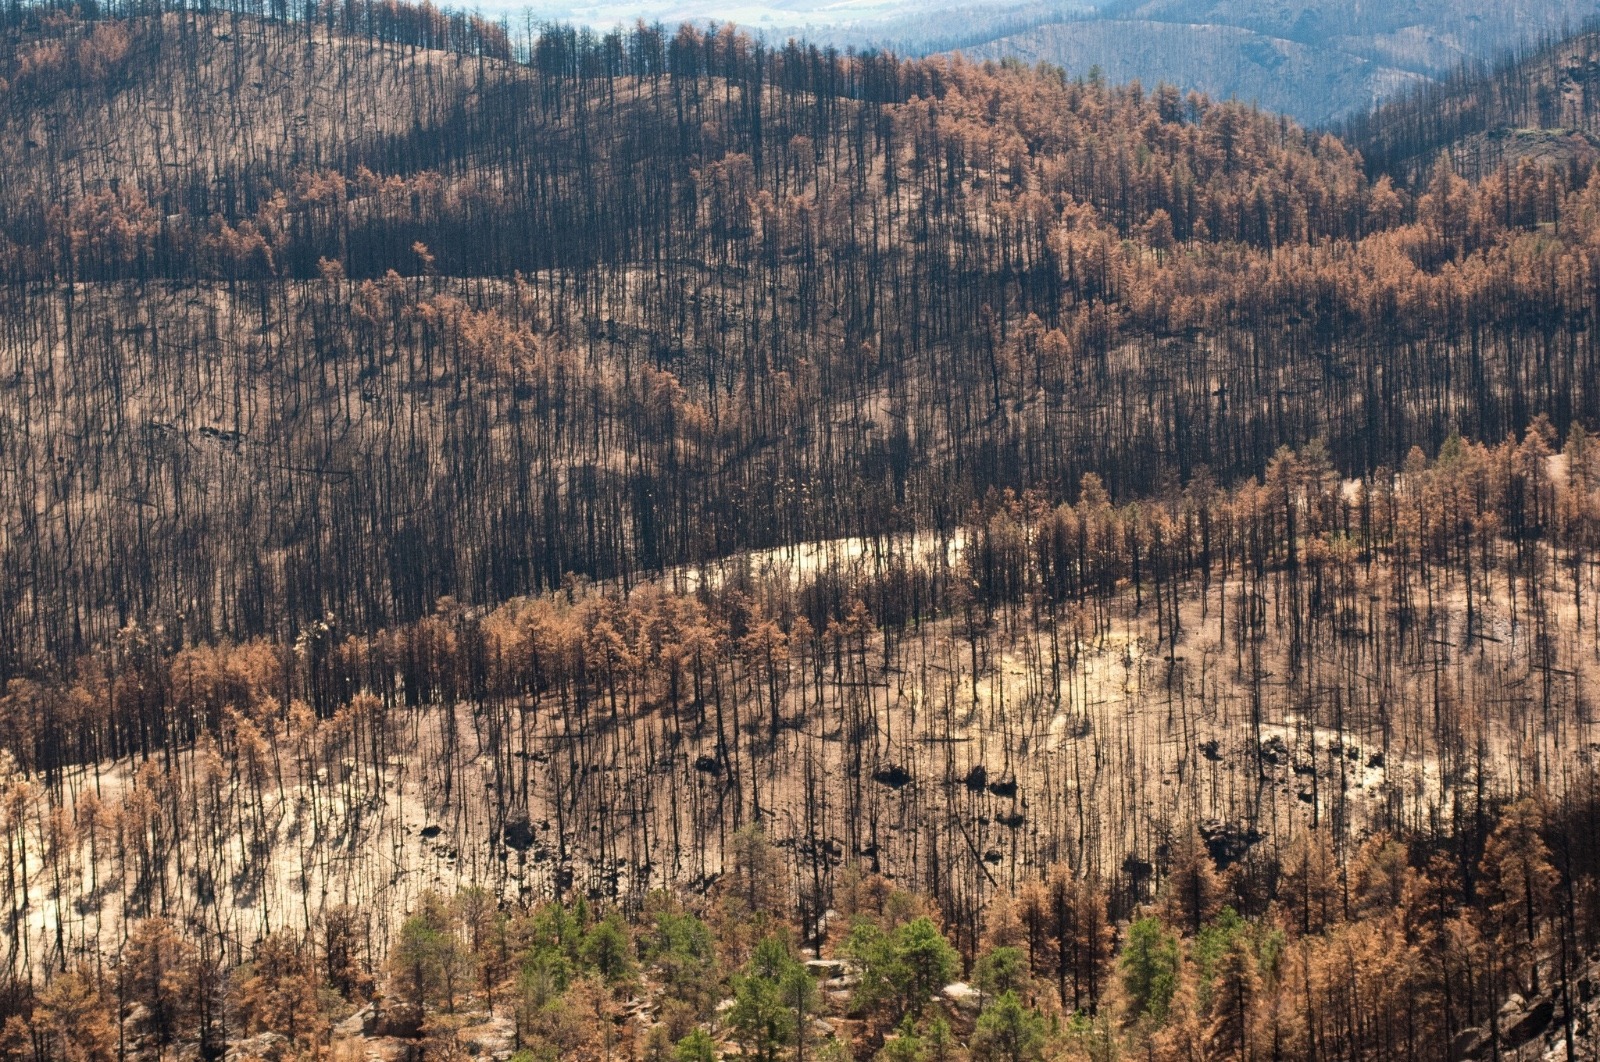 As western forests dry, trees become weakened and, as Olsen says, are "sitting ducks" for outbreaks of voracious mountain beetles. If lack of moisture doesn't kill trees, insects will, leaving forests with dead needs temporarily more susceptible to burning.  Photo of national forest in Colorado courtesy USDA